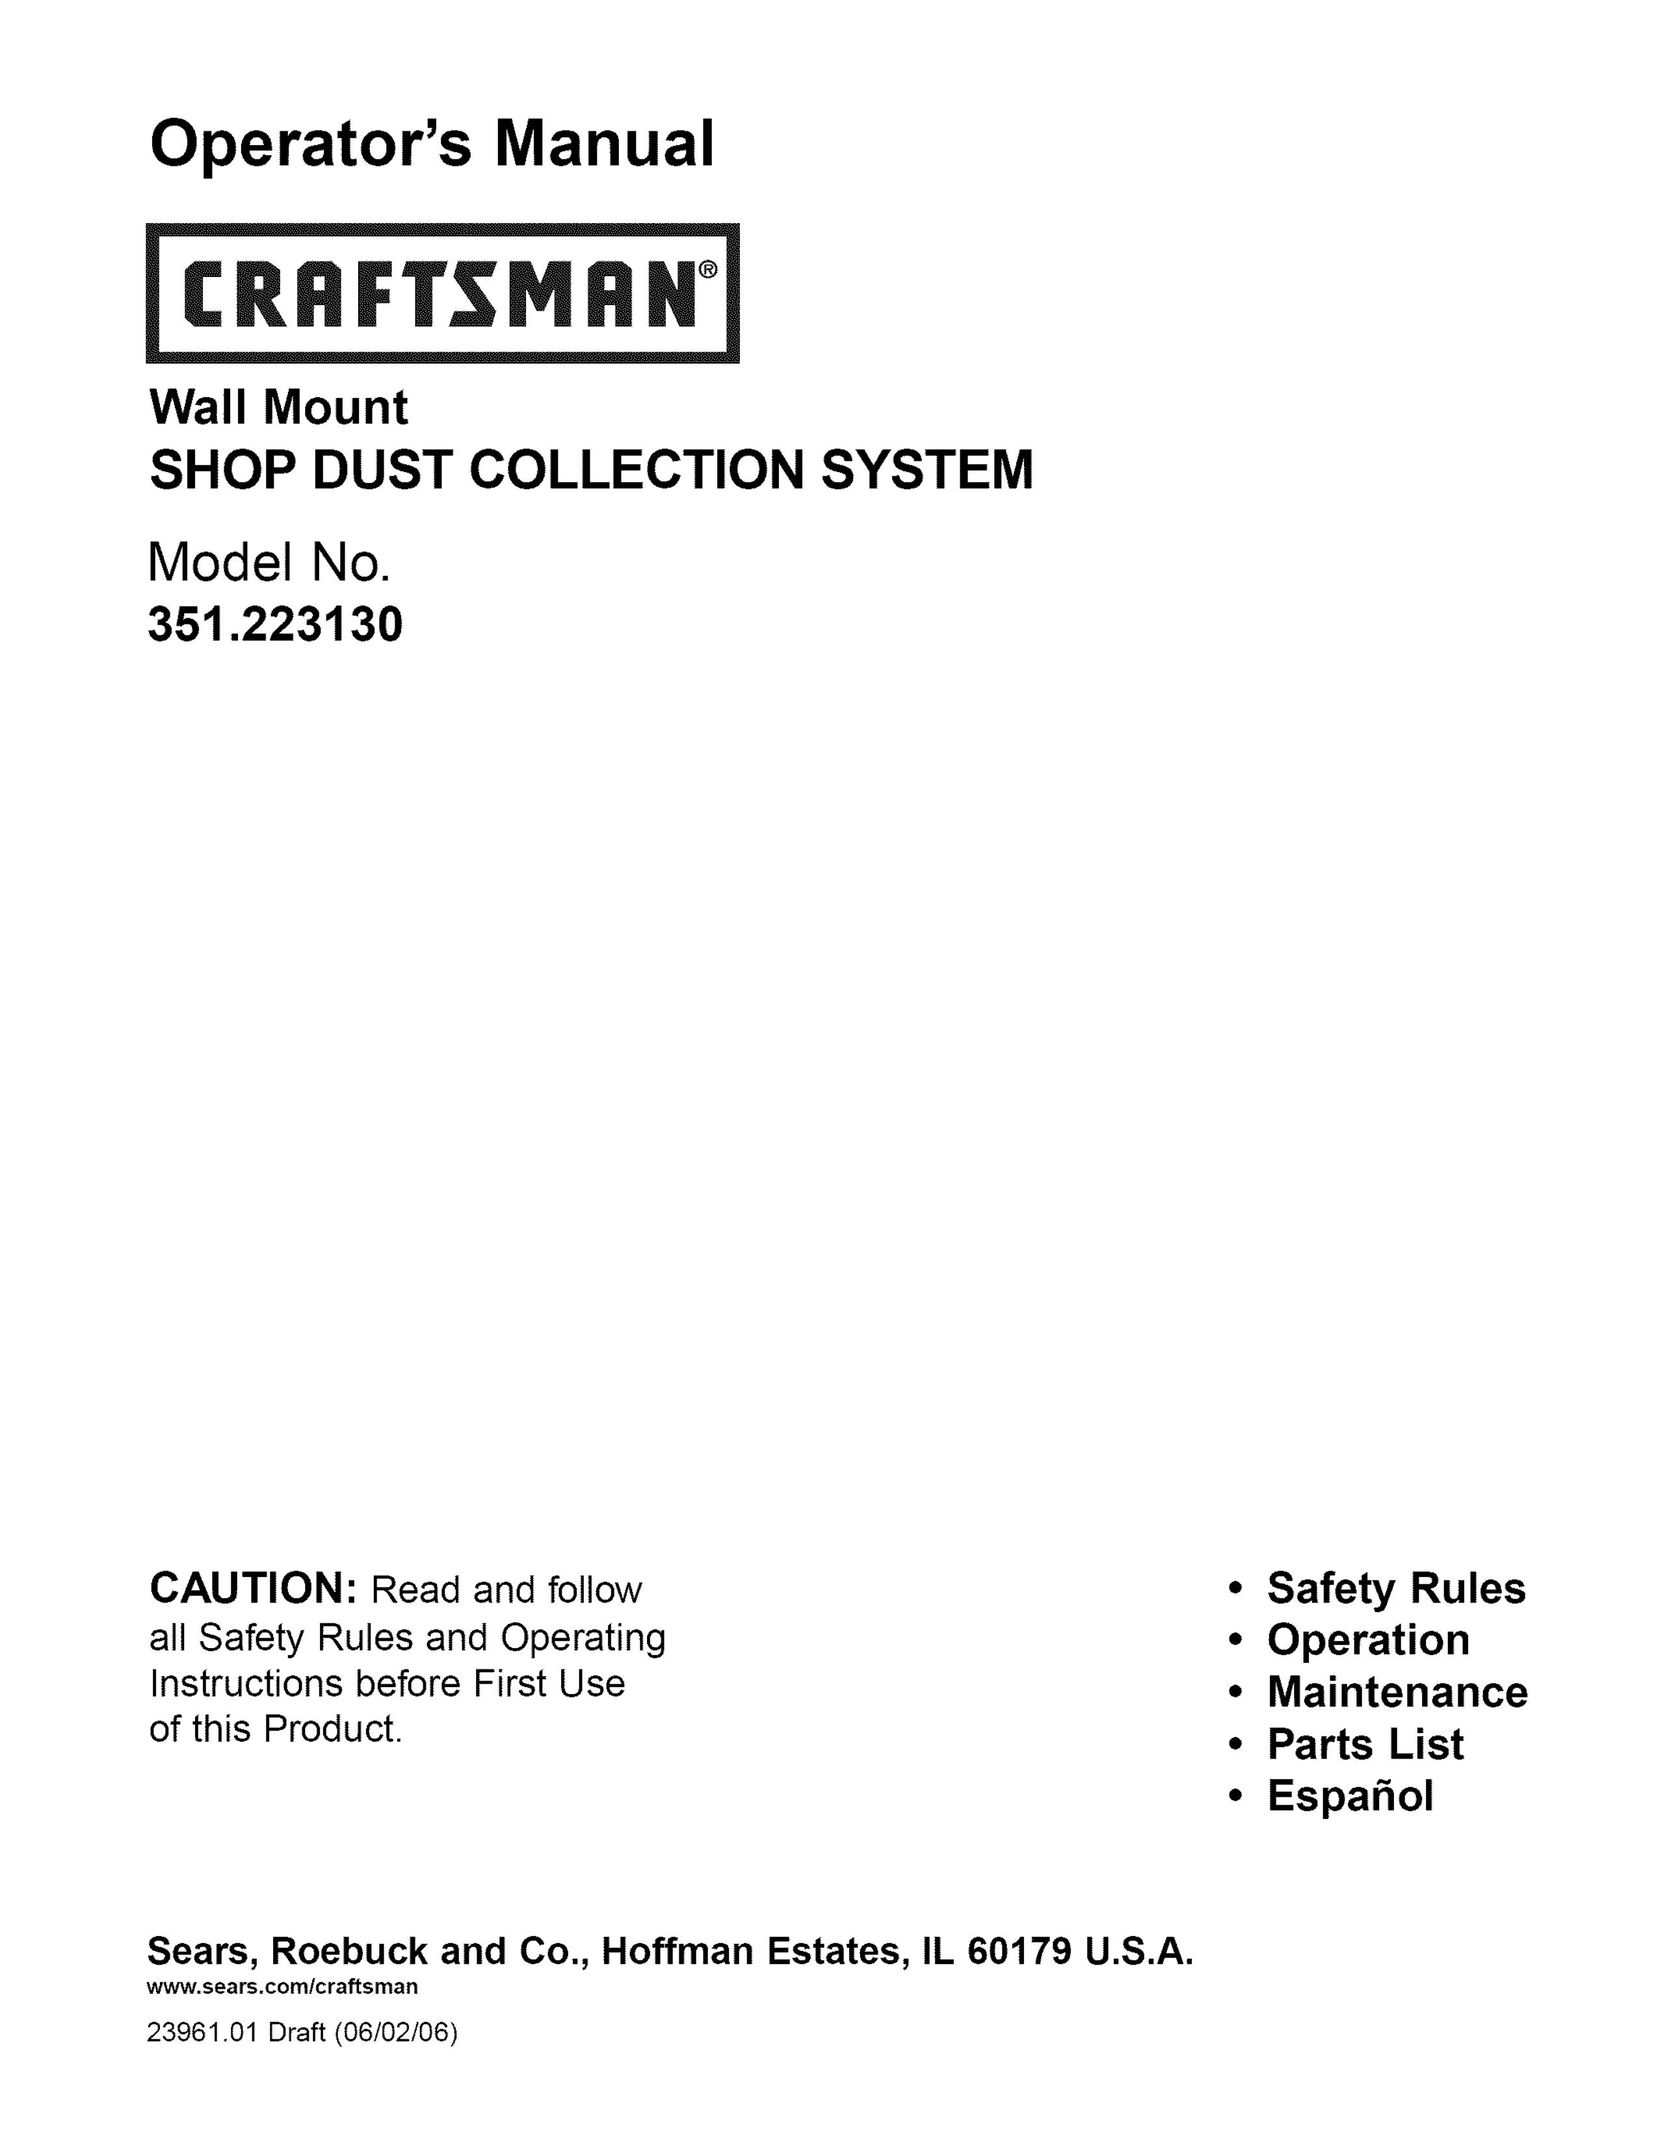 Craftsman 351.223130 Dust Collector User Manual